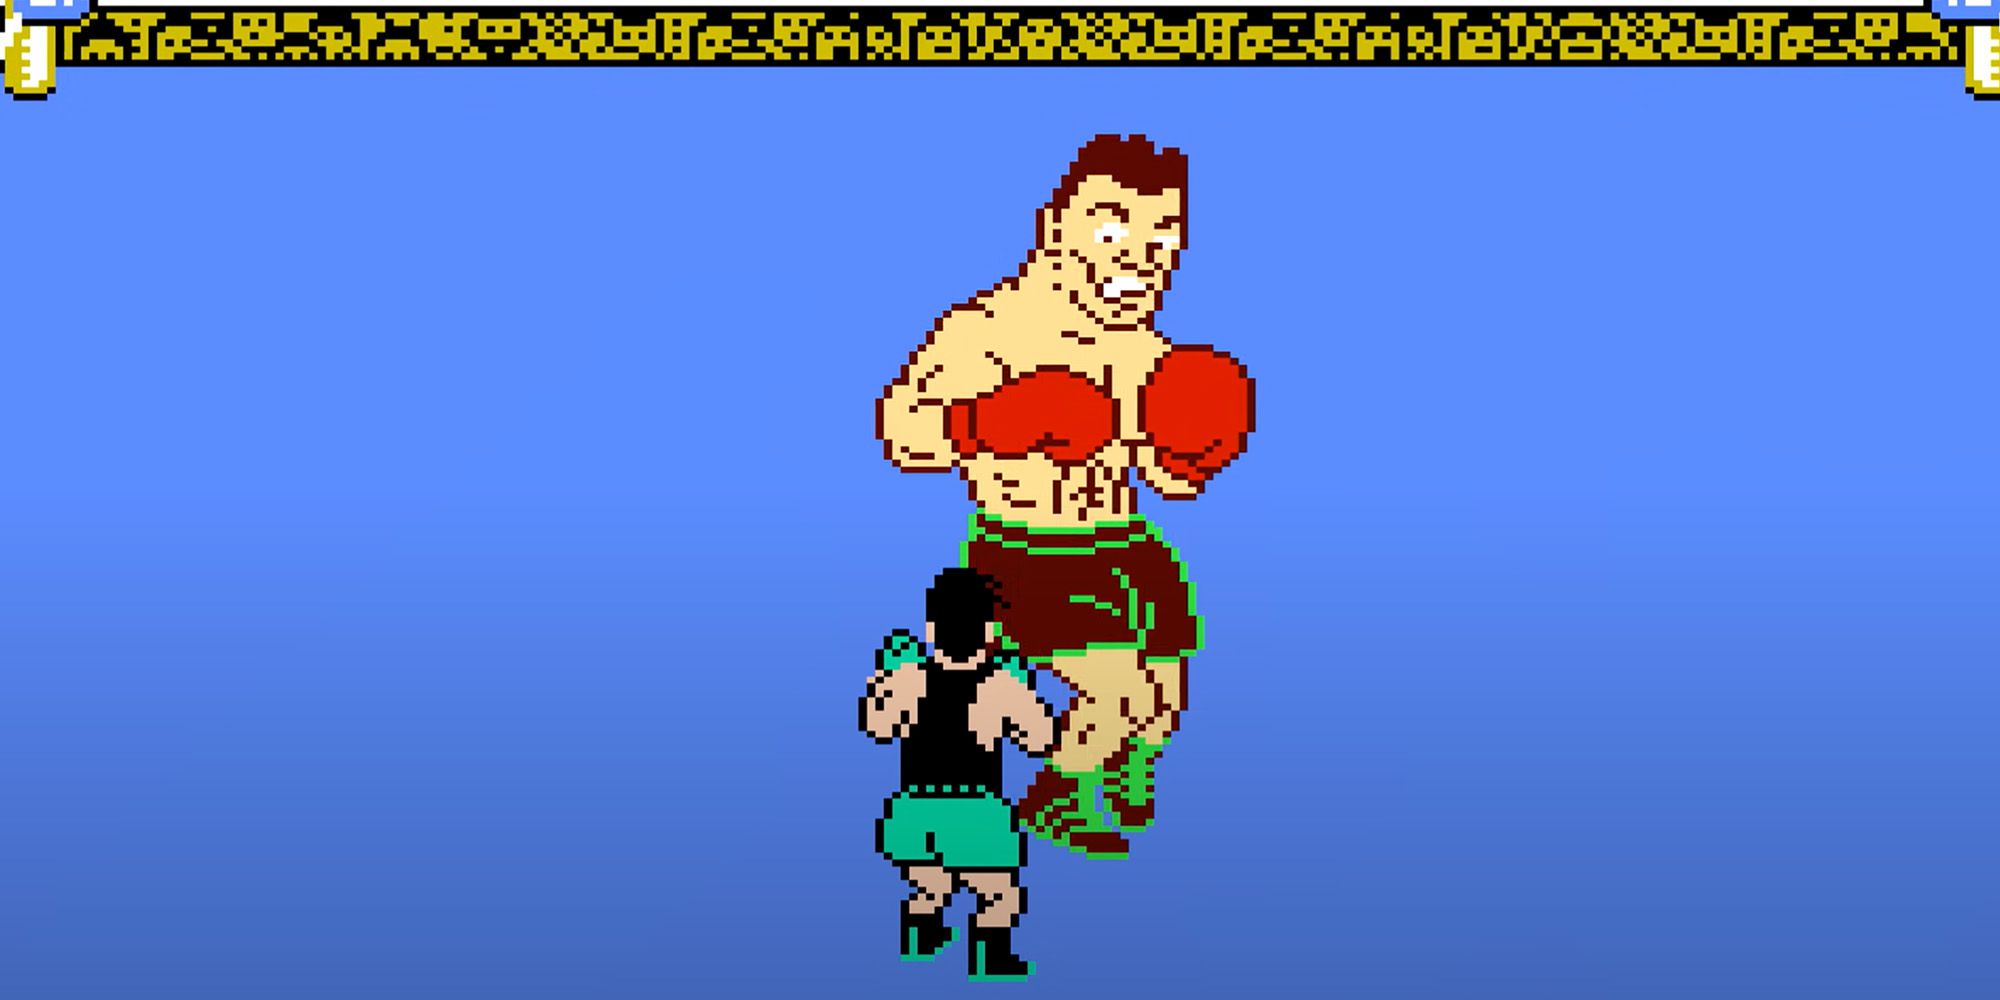 Little Mac fighting Mr. Dream in Punch-Out